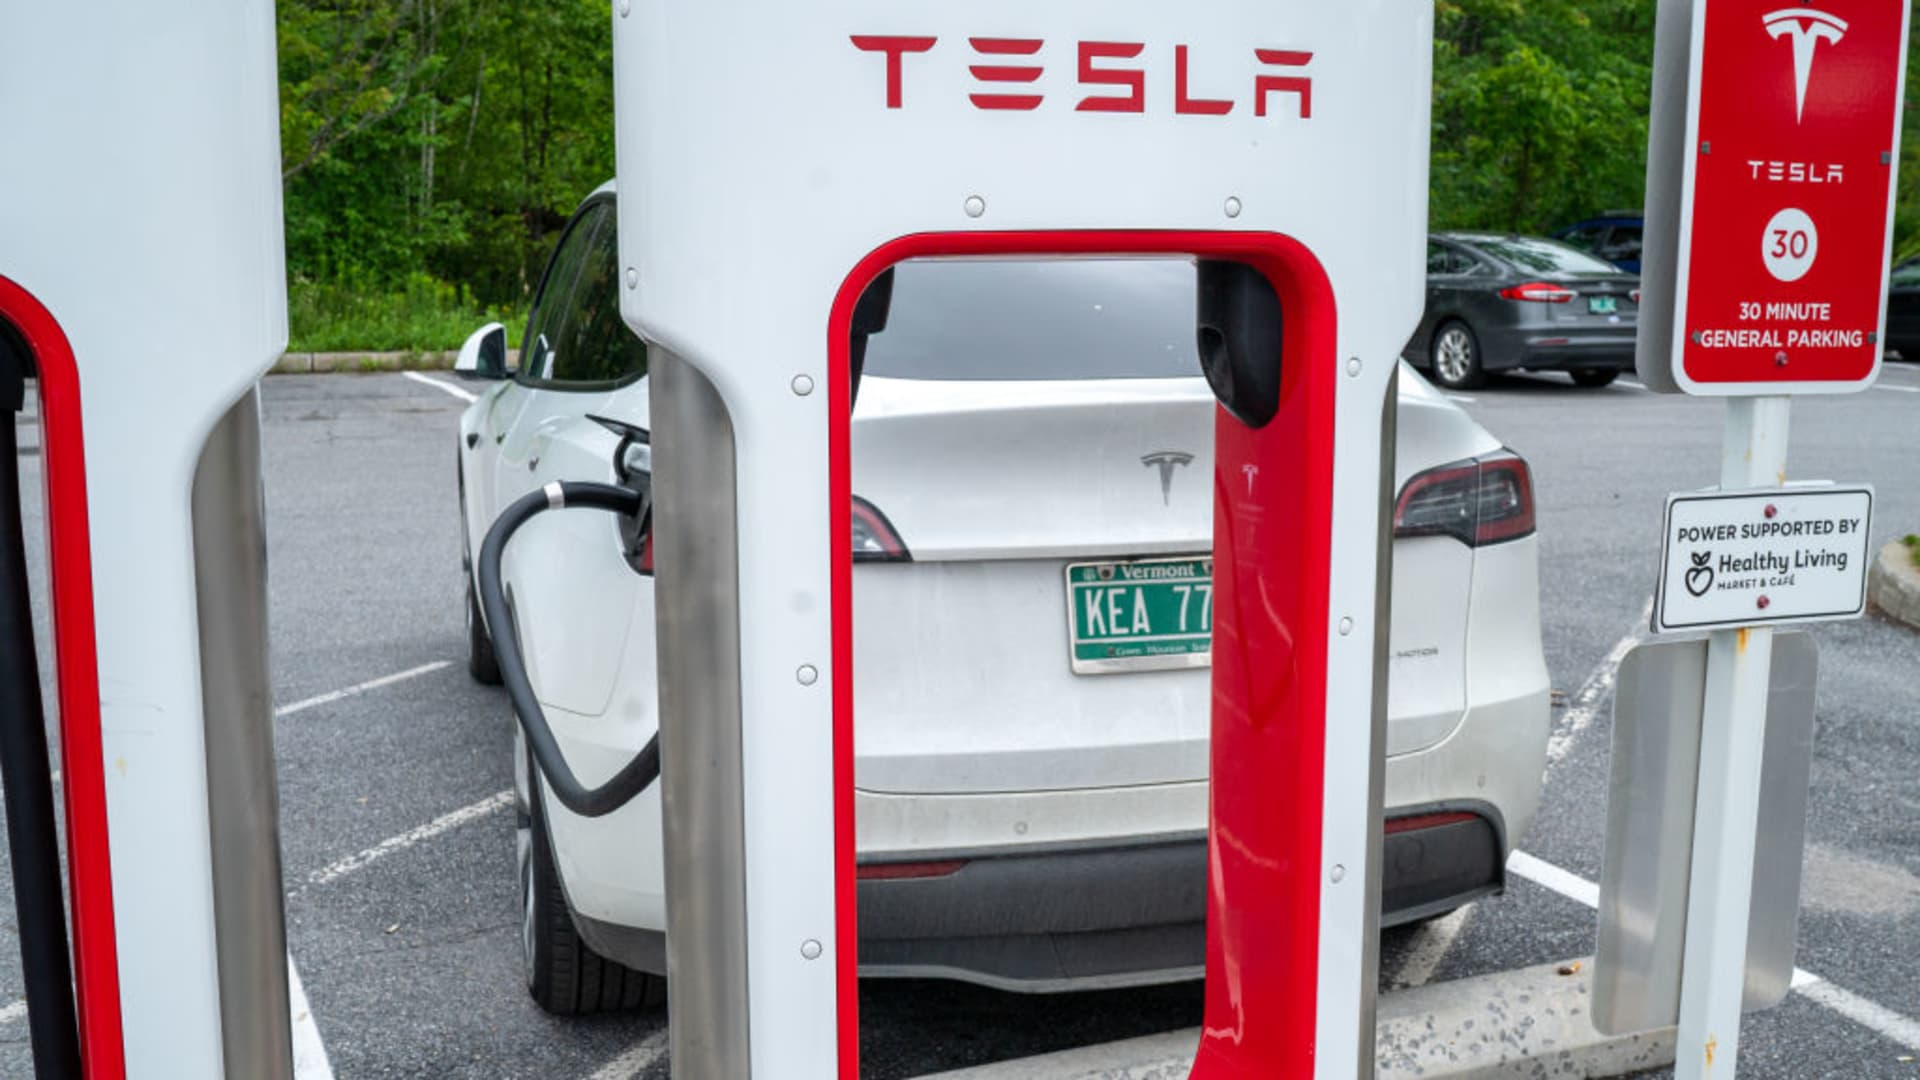 Tesla stands to earn billions of dollars a year by opening U.S. charging stations to drivers of Ford and other EVs